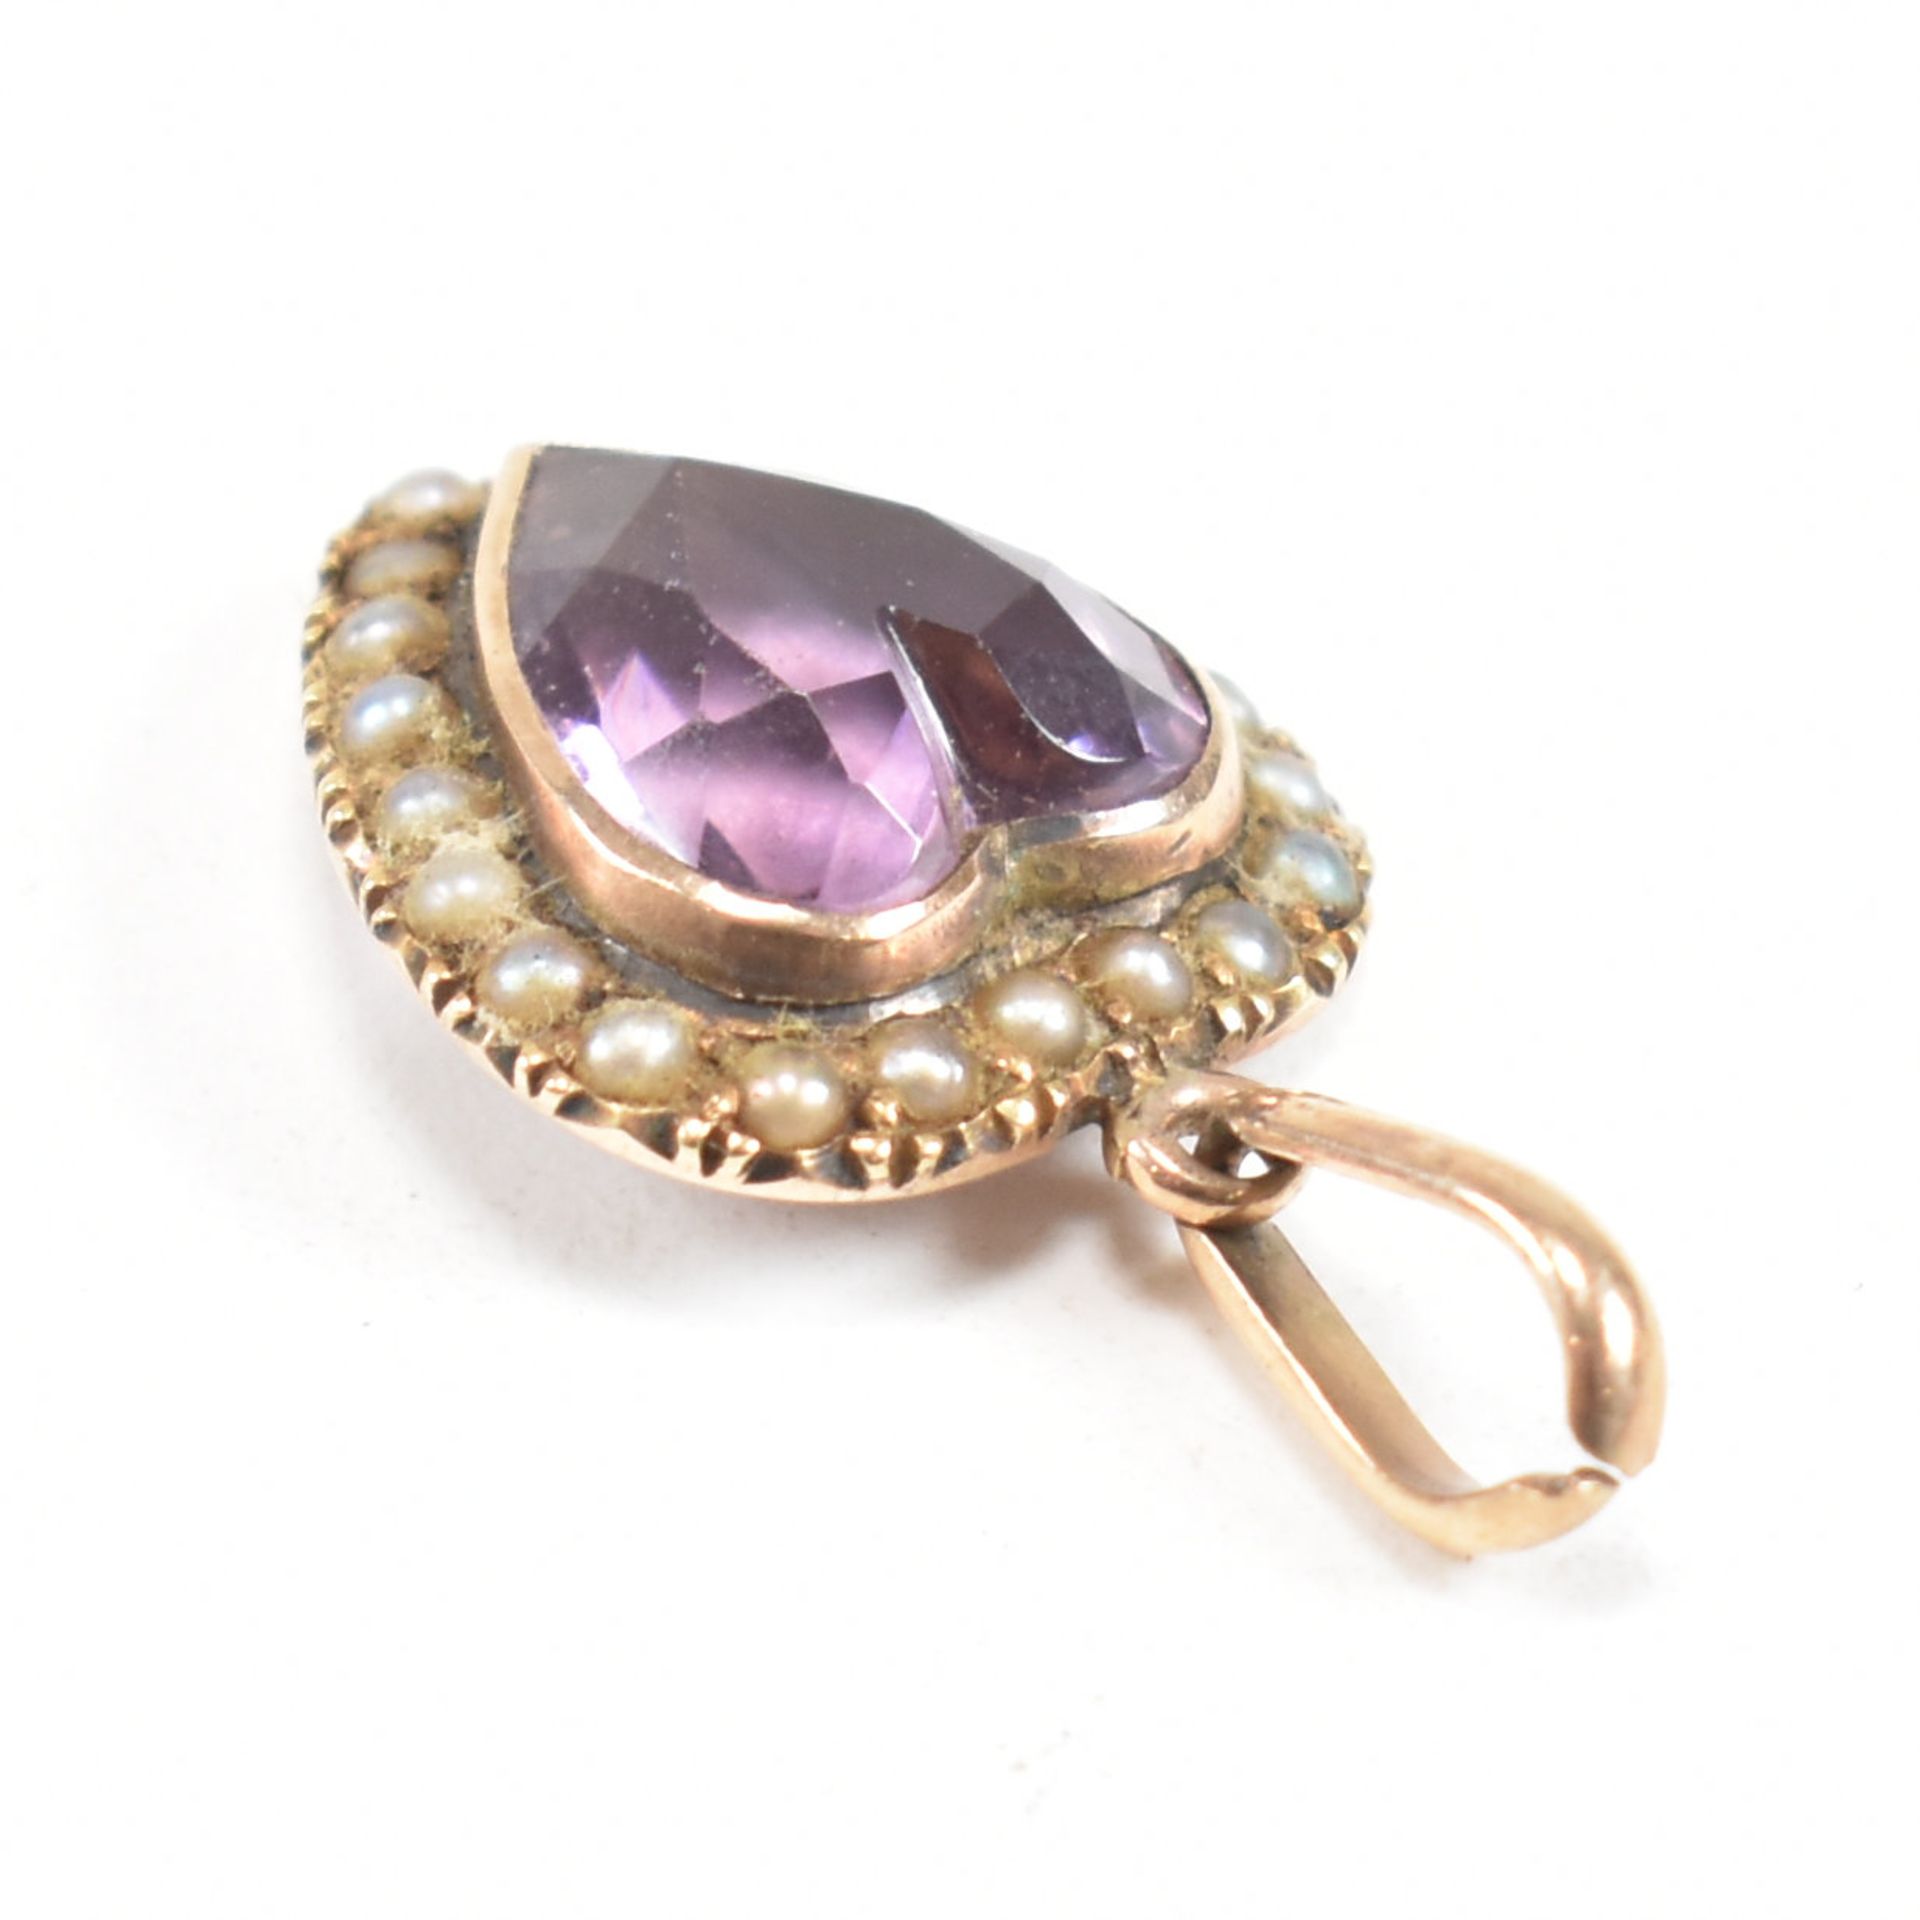 19TH CENTURY GOLD AMETHYST & PEARL HEART NECKLACE PENDANT - Image 5 of 5